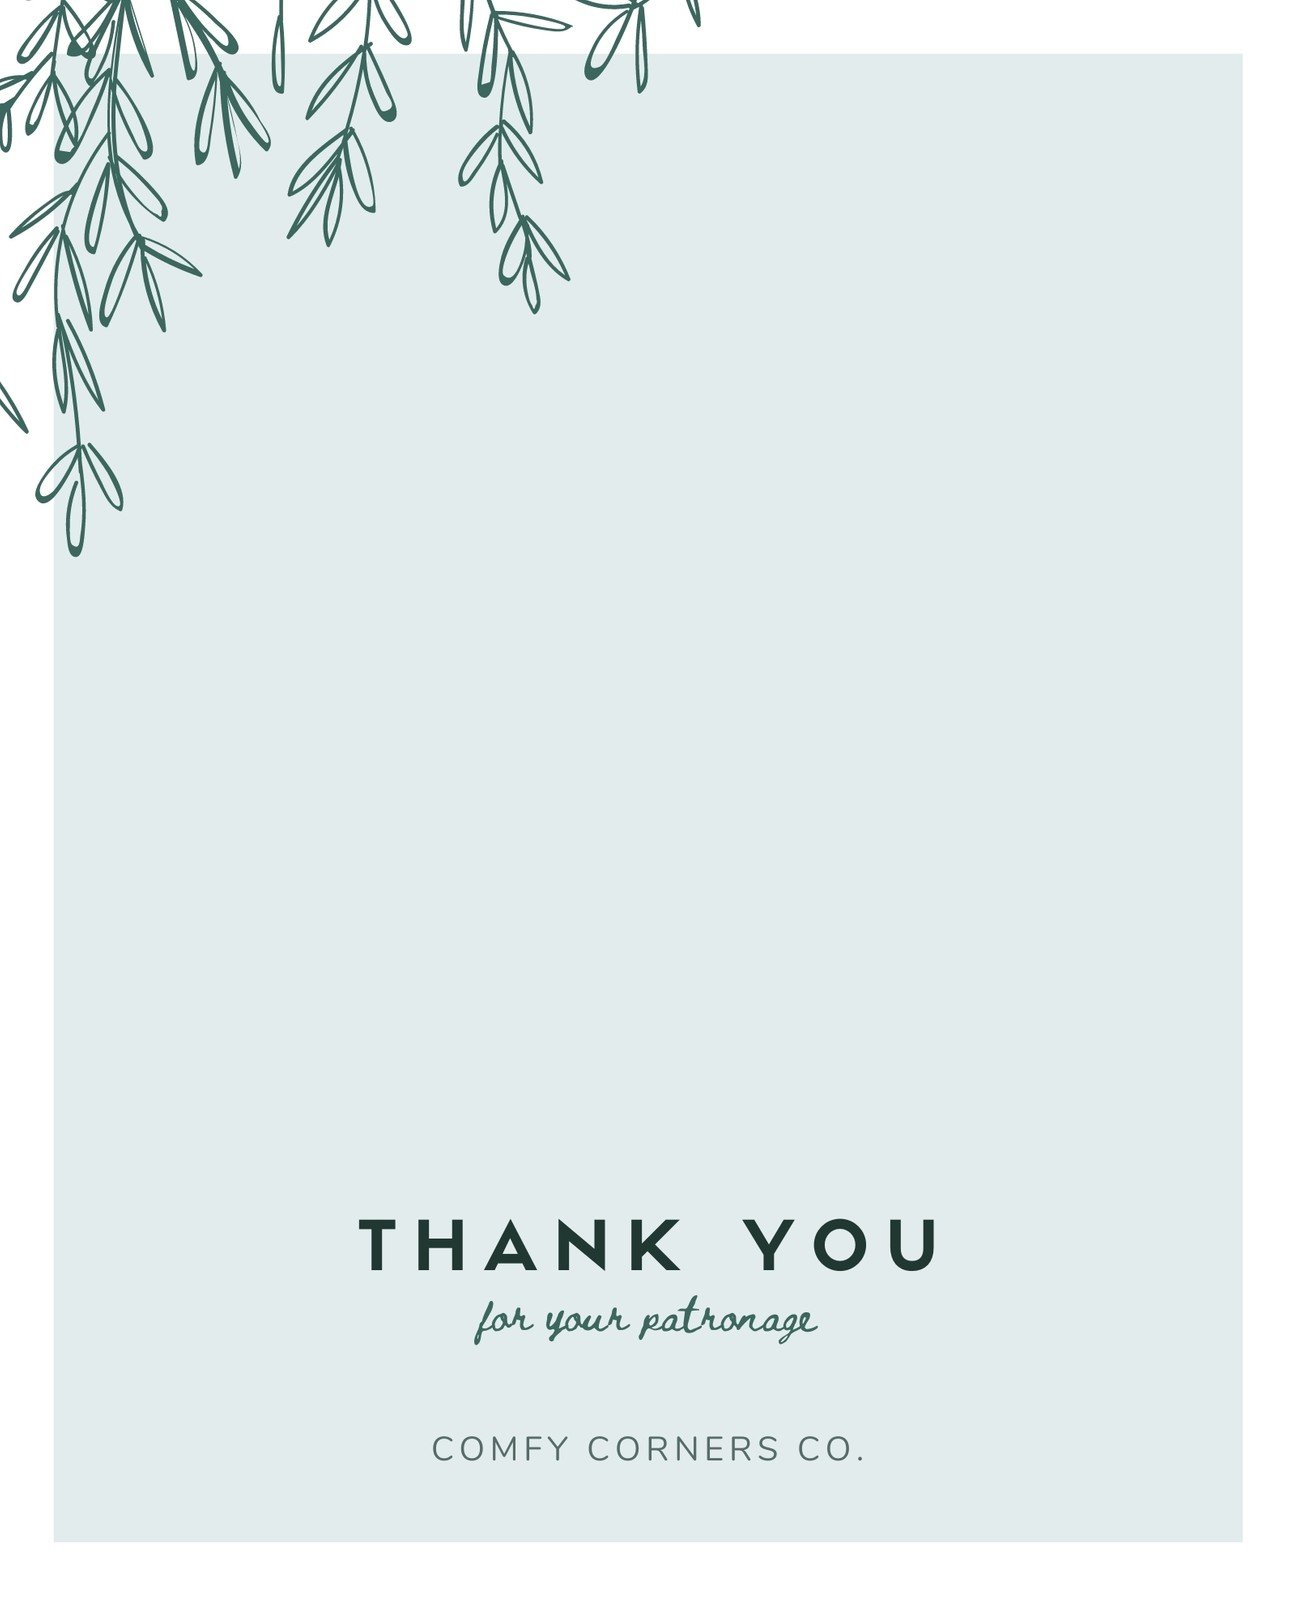 Green Vines Business Thank You Note Card - Templates by Canva Intended For Thank You Note Card Template